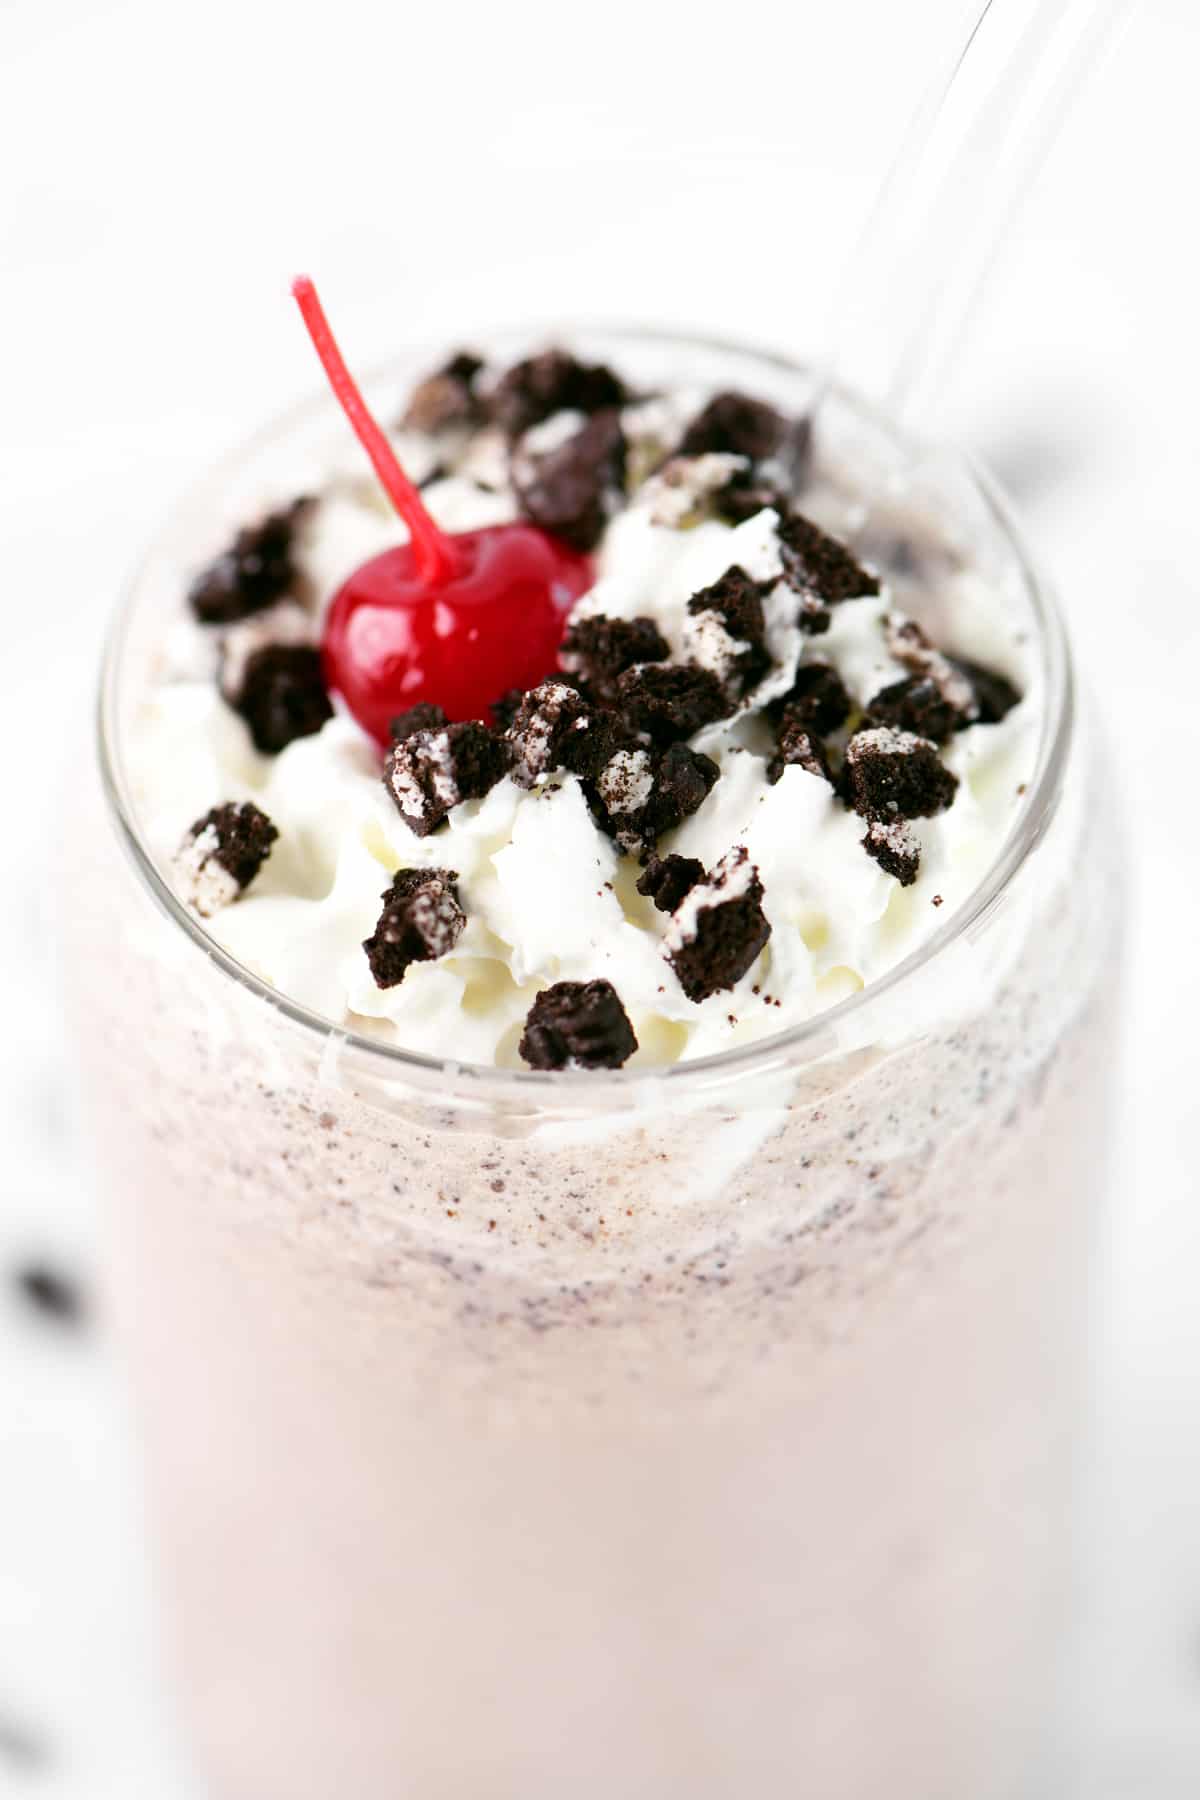 Cookie crumbs ad a cherry with whipped cream on an Oreo milkshake.